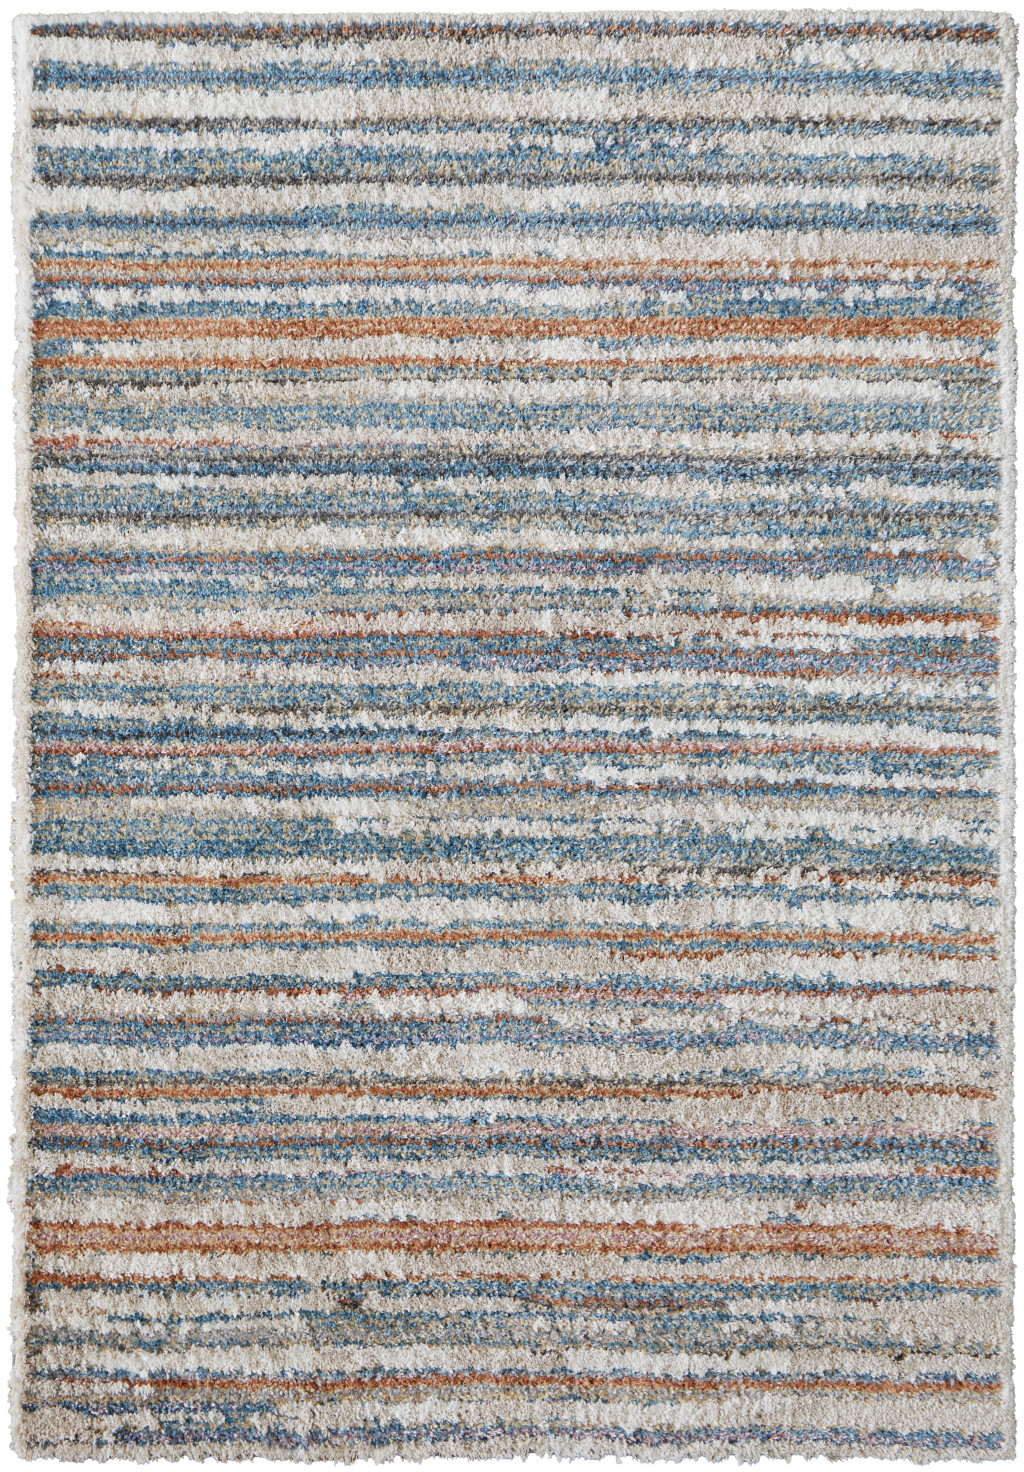 10' X 14' Ivory Blue And Orange Striped Power Loom Stain Resistant Area Rug-514531-1